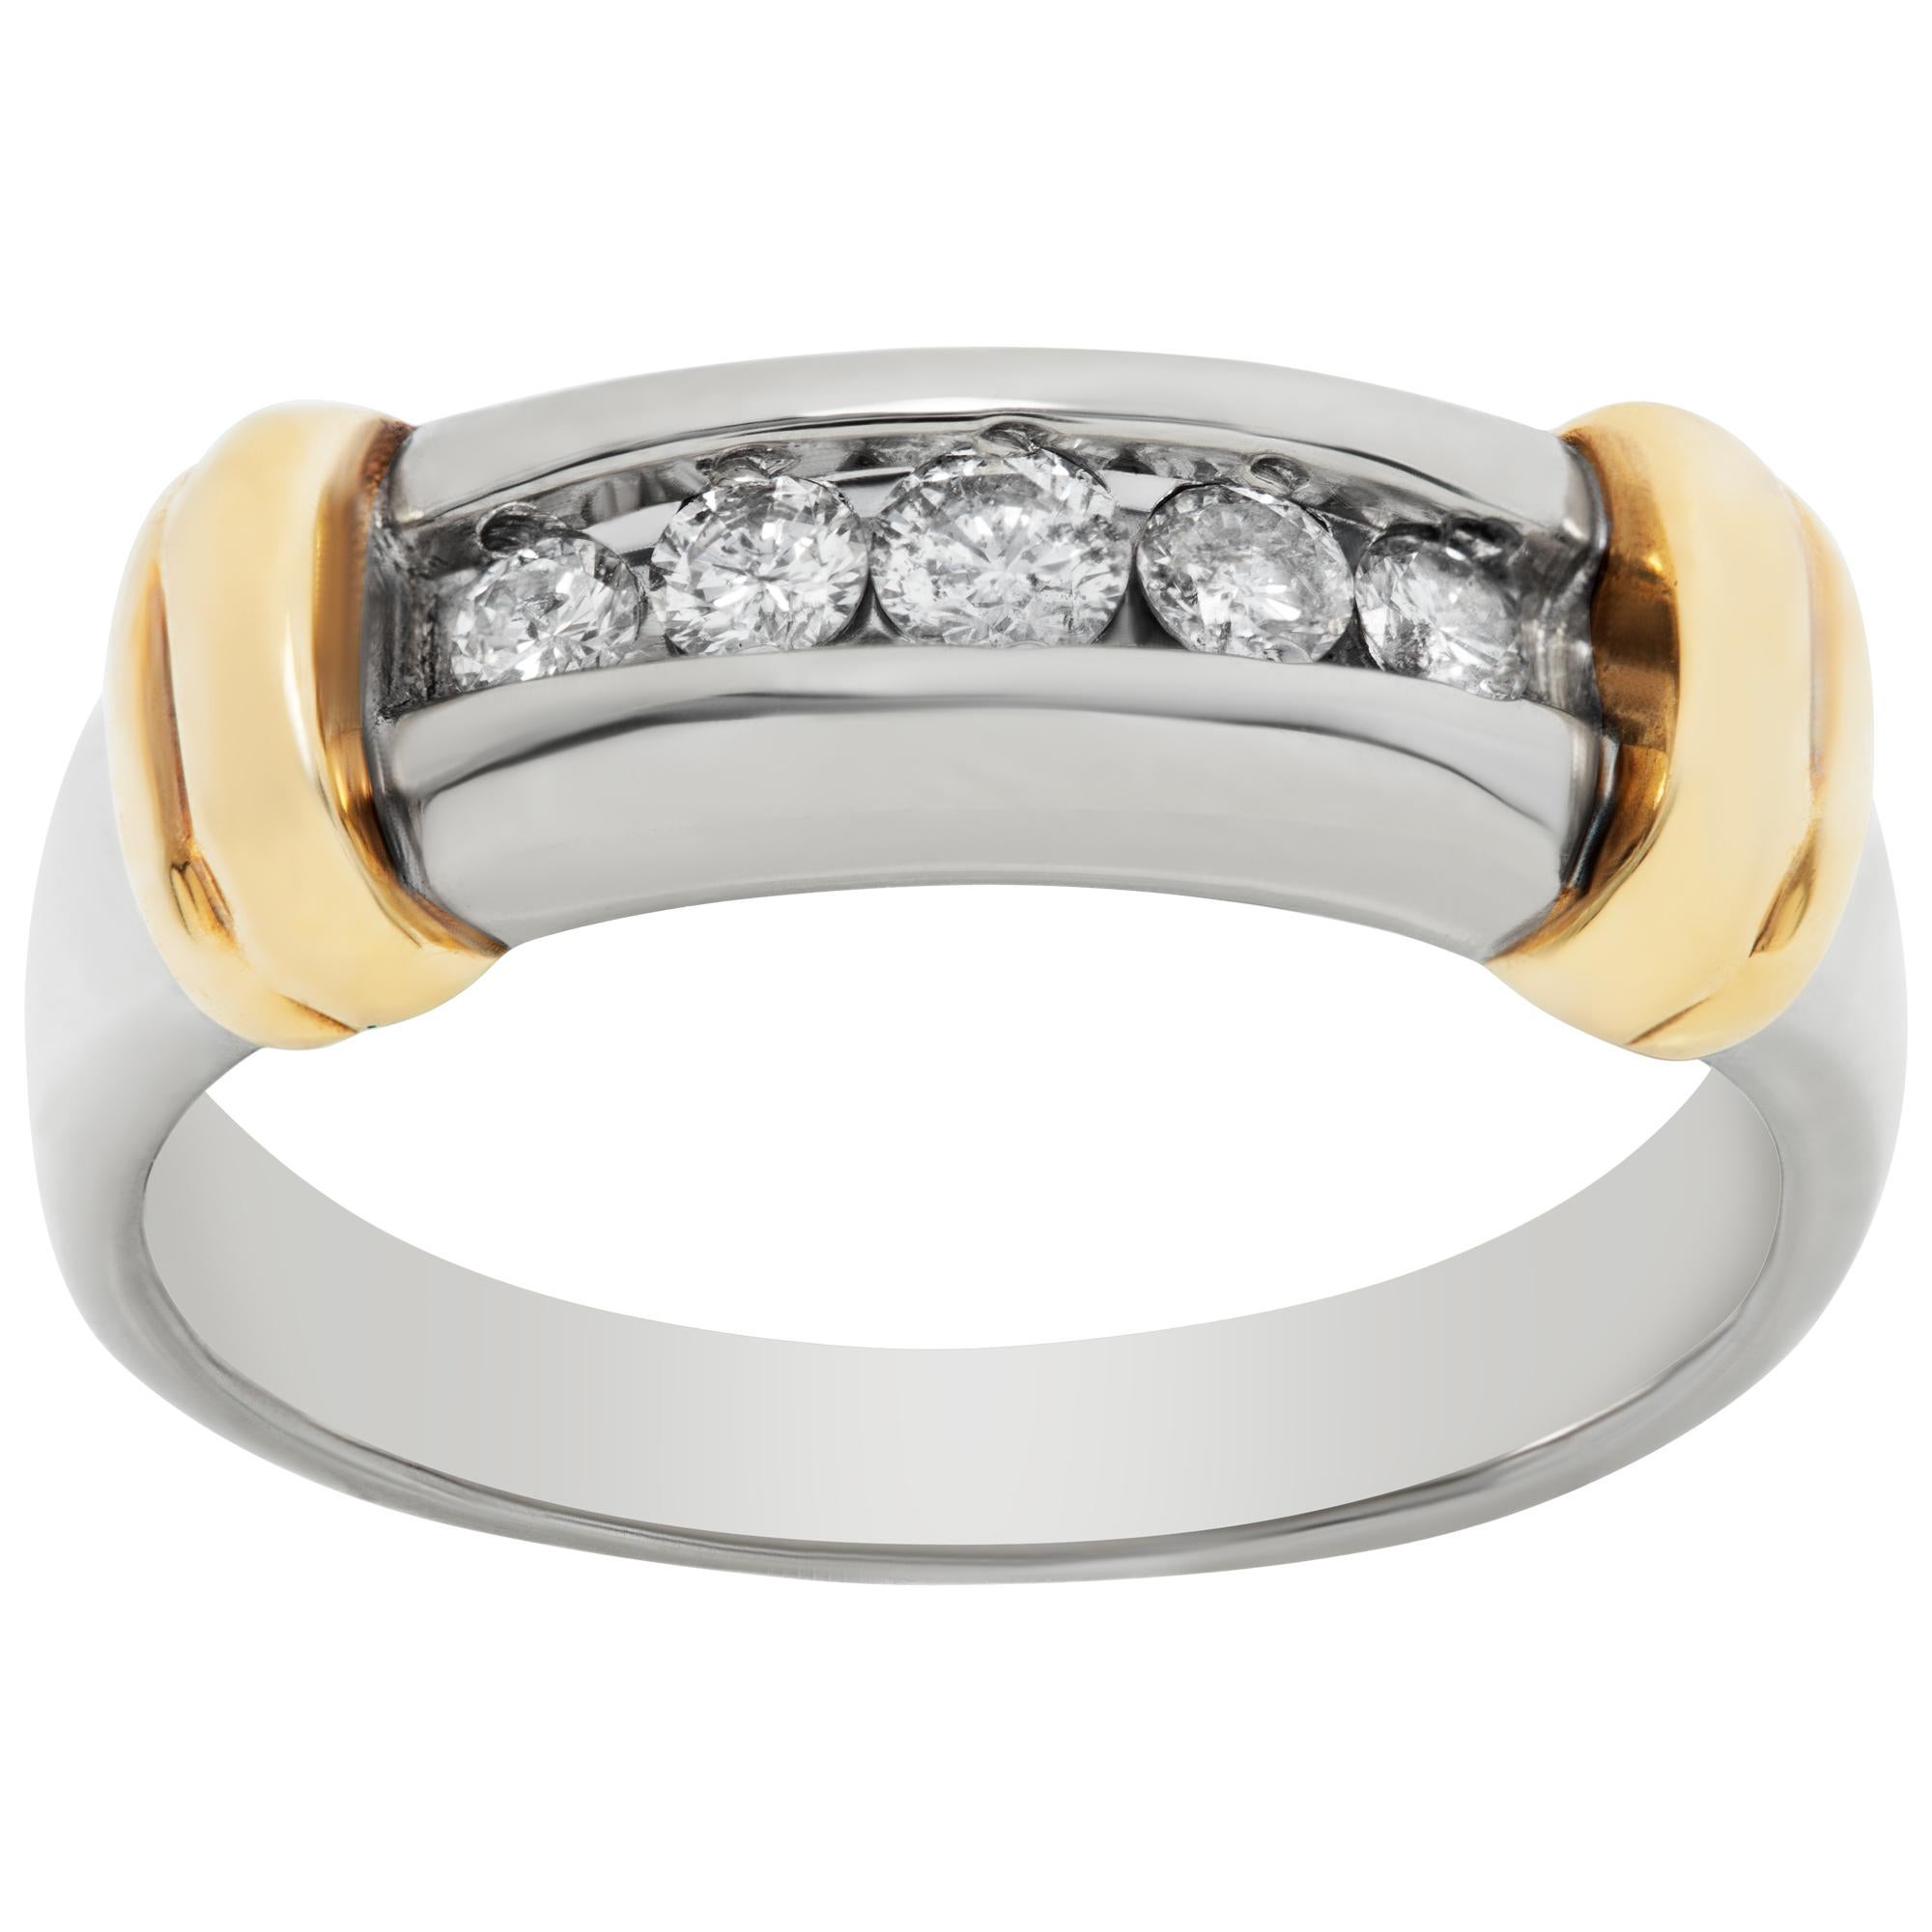 Diamond band with approximately 0.25 carat in 18k white gold and 18k yellow gold accents. Size 6.5, width 7mm, shank 3mm.This Diamond ring is currently size 6.5 and some items can be sized up or down, please ask! It weighs 3.6 pennyweights and is